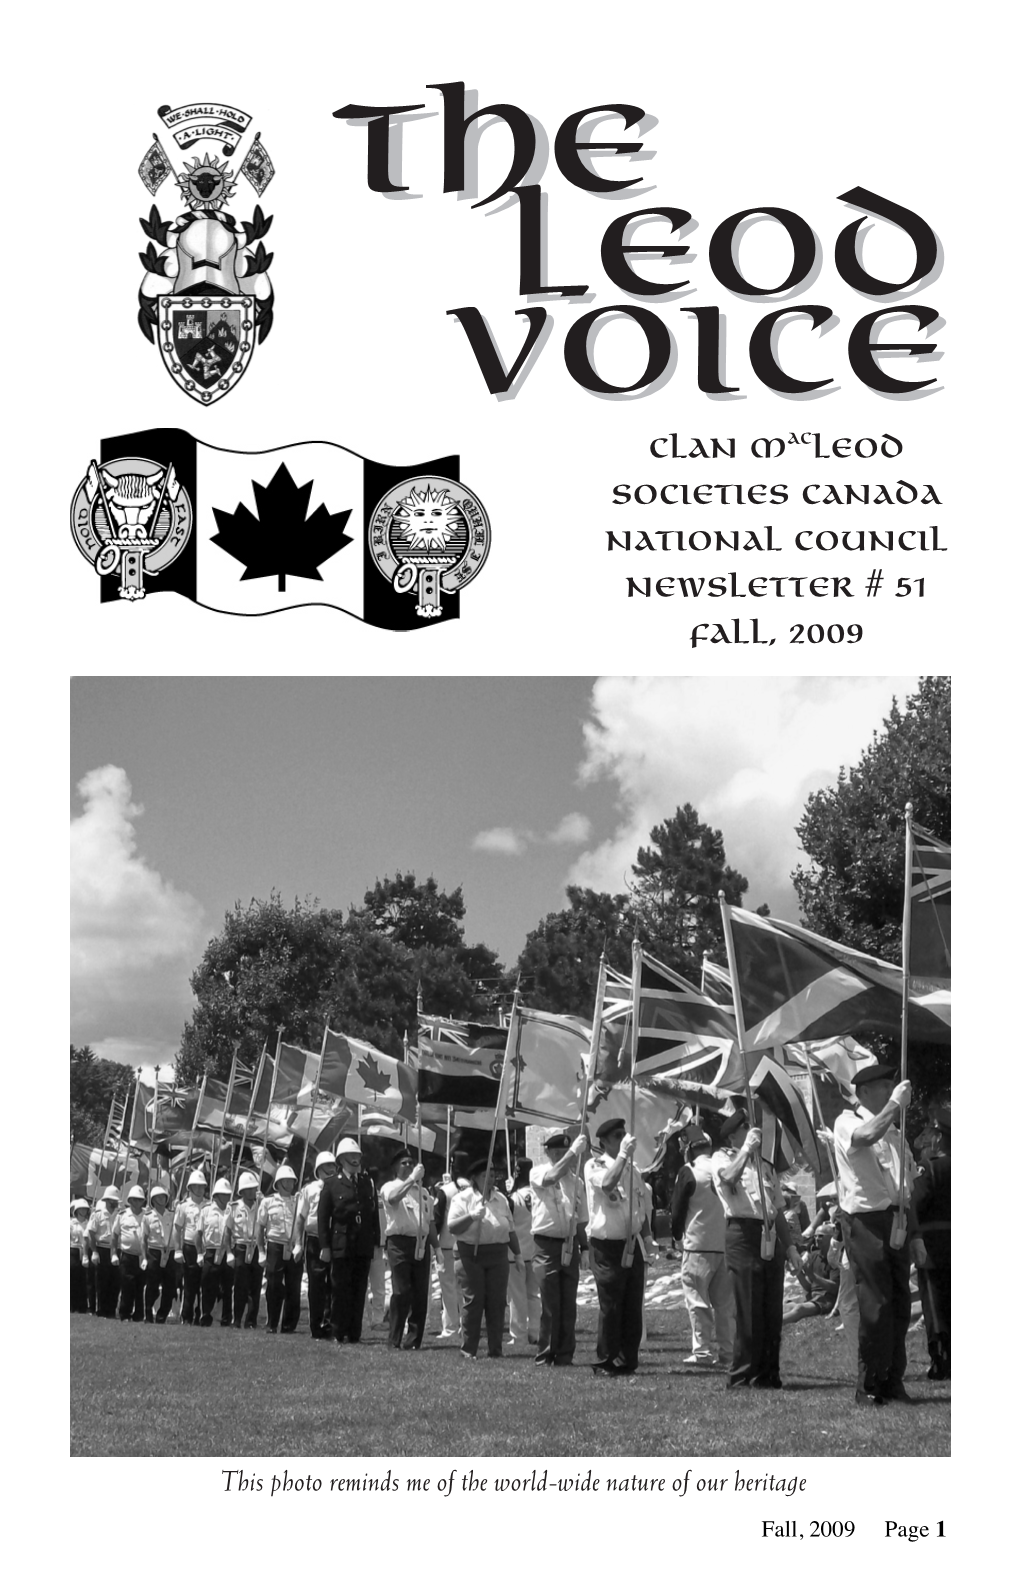 Clan Macleod Societies Canada National Council Newsletter # 51 FALL, 2009